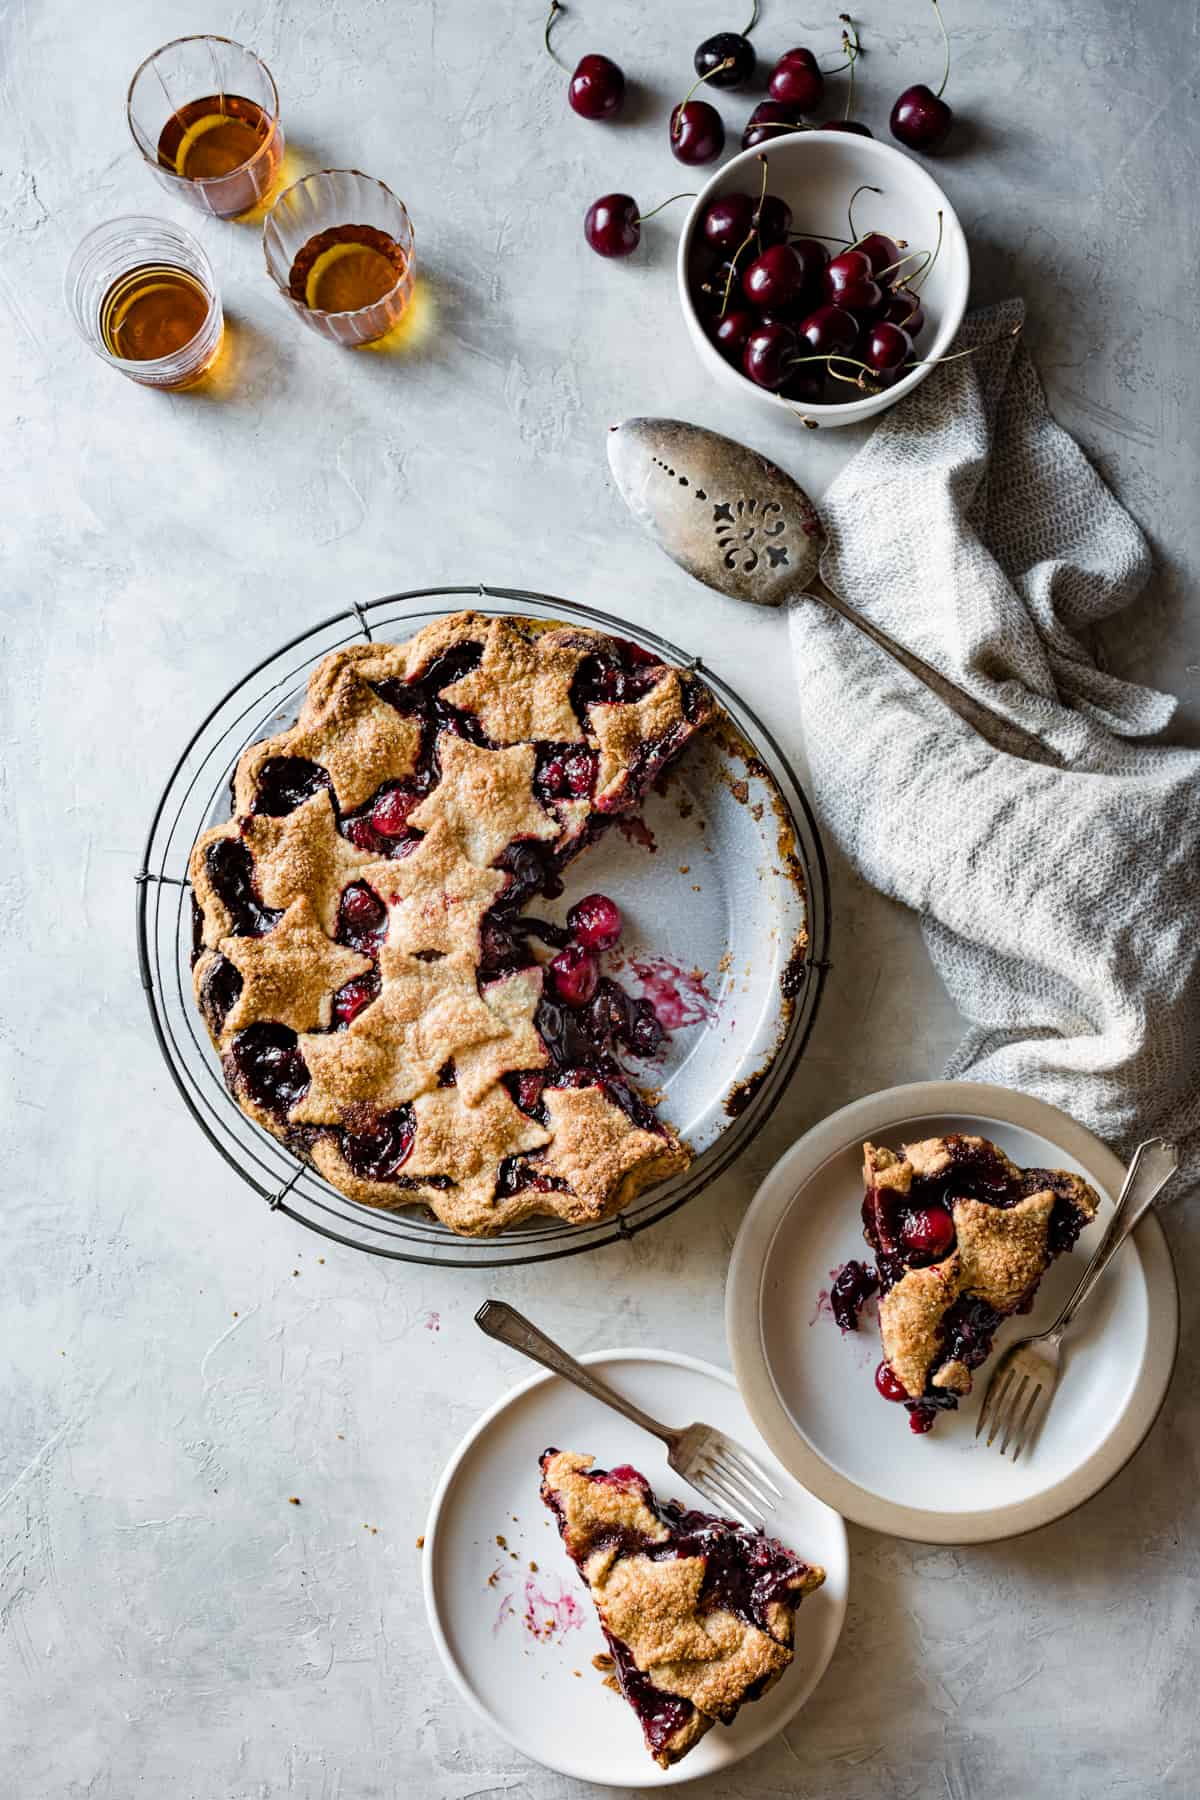 Gluten-Free Cherry Pie with Bourbon & Spice, cut and served on plates